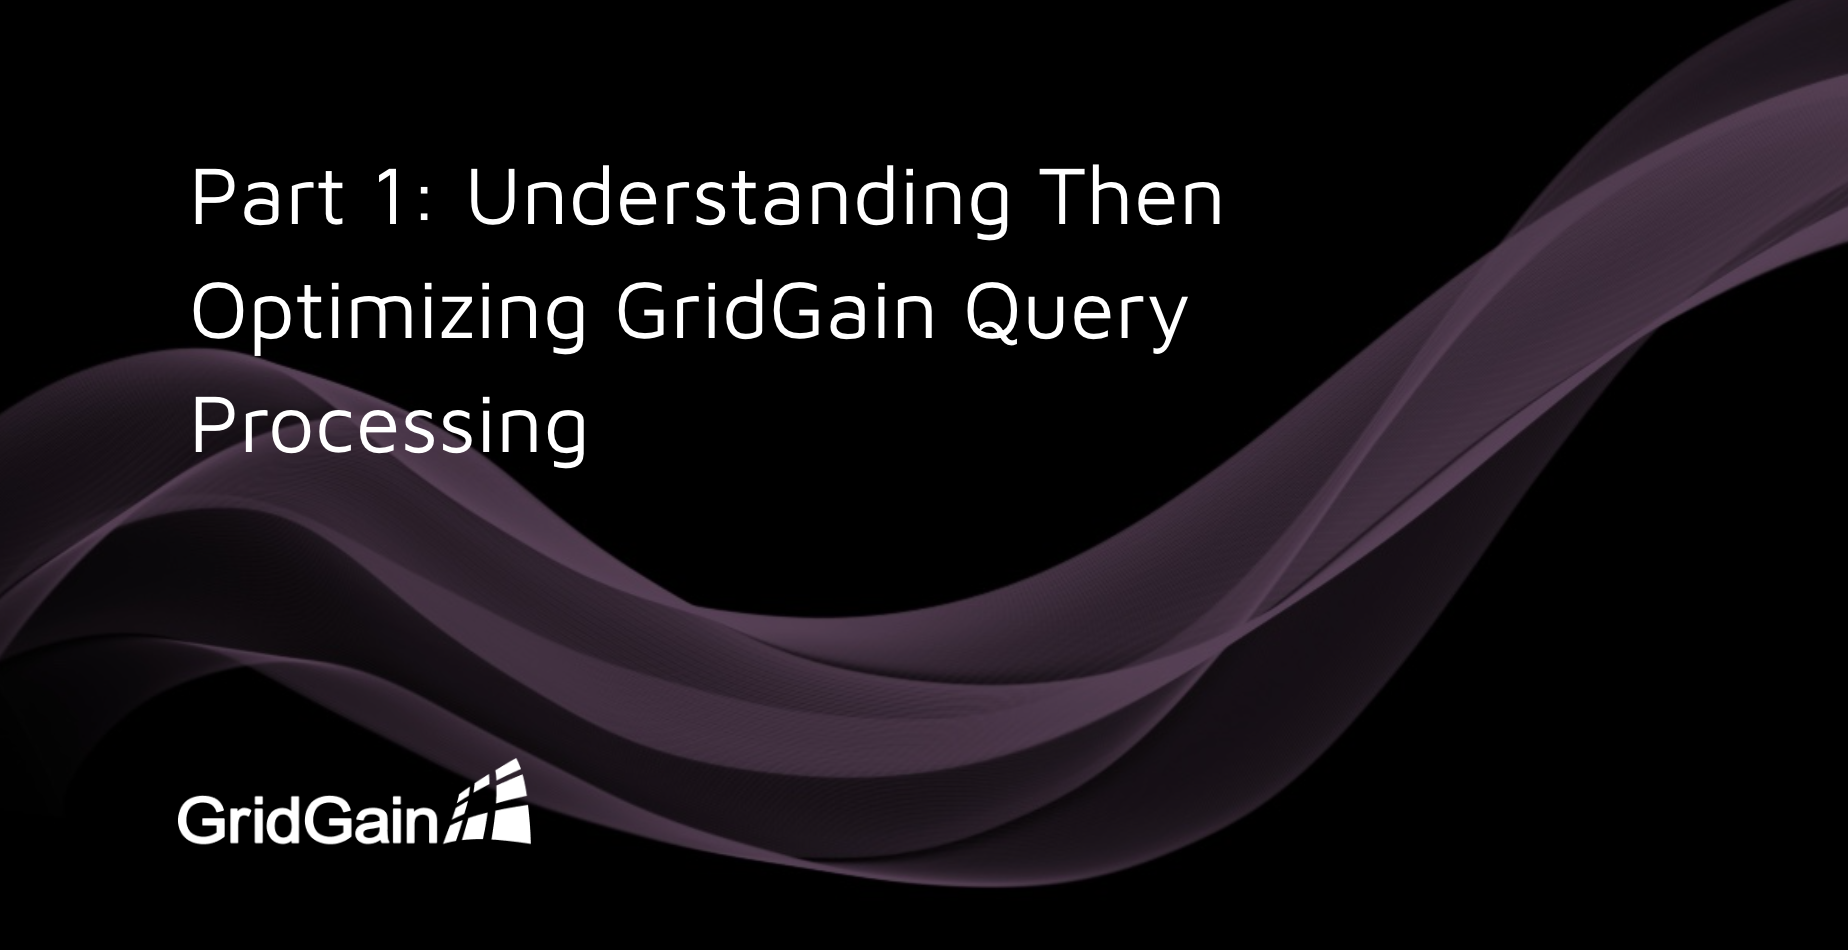 Query Processing